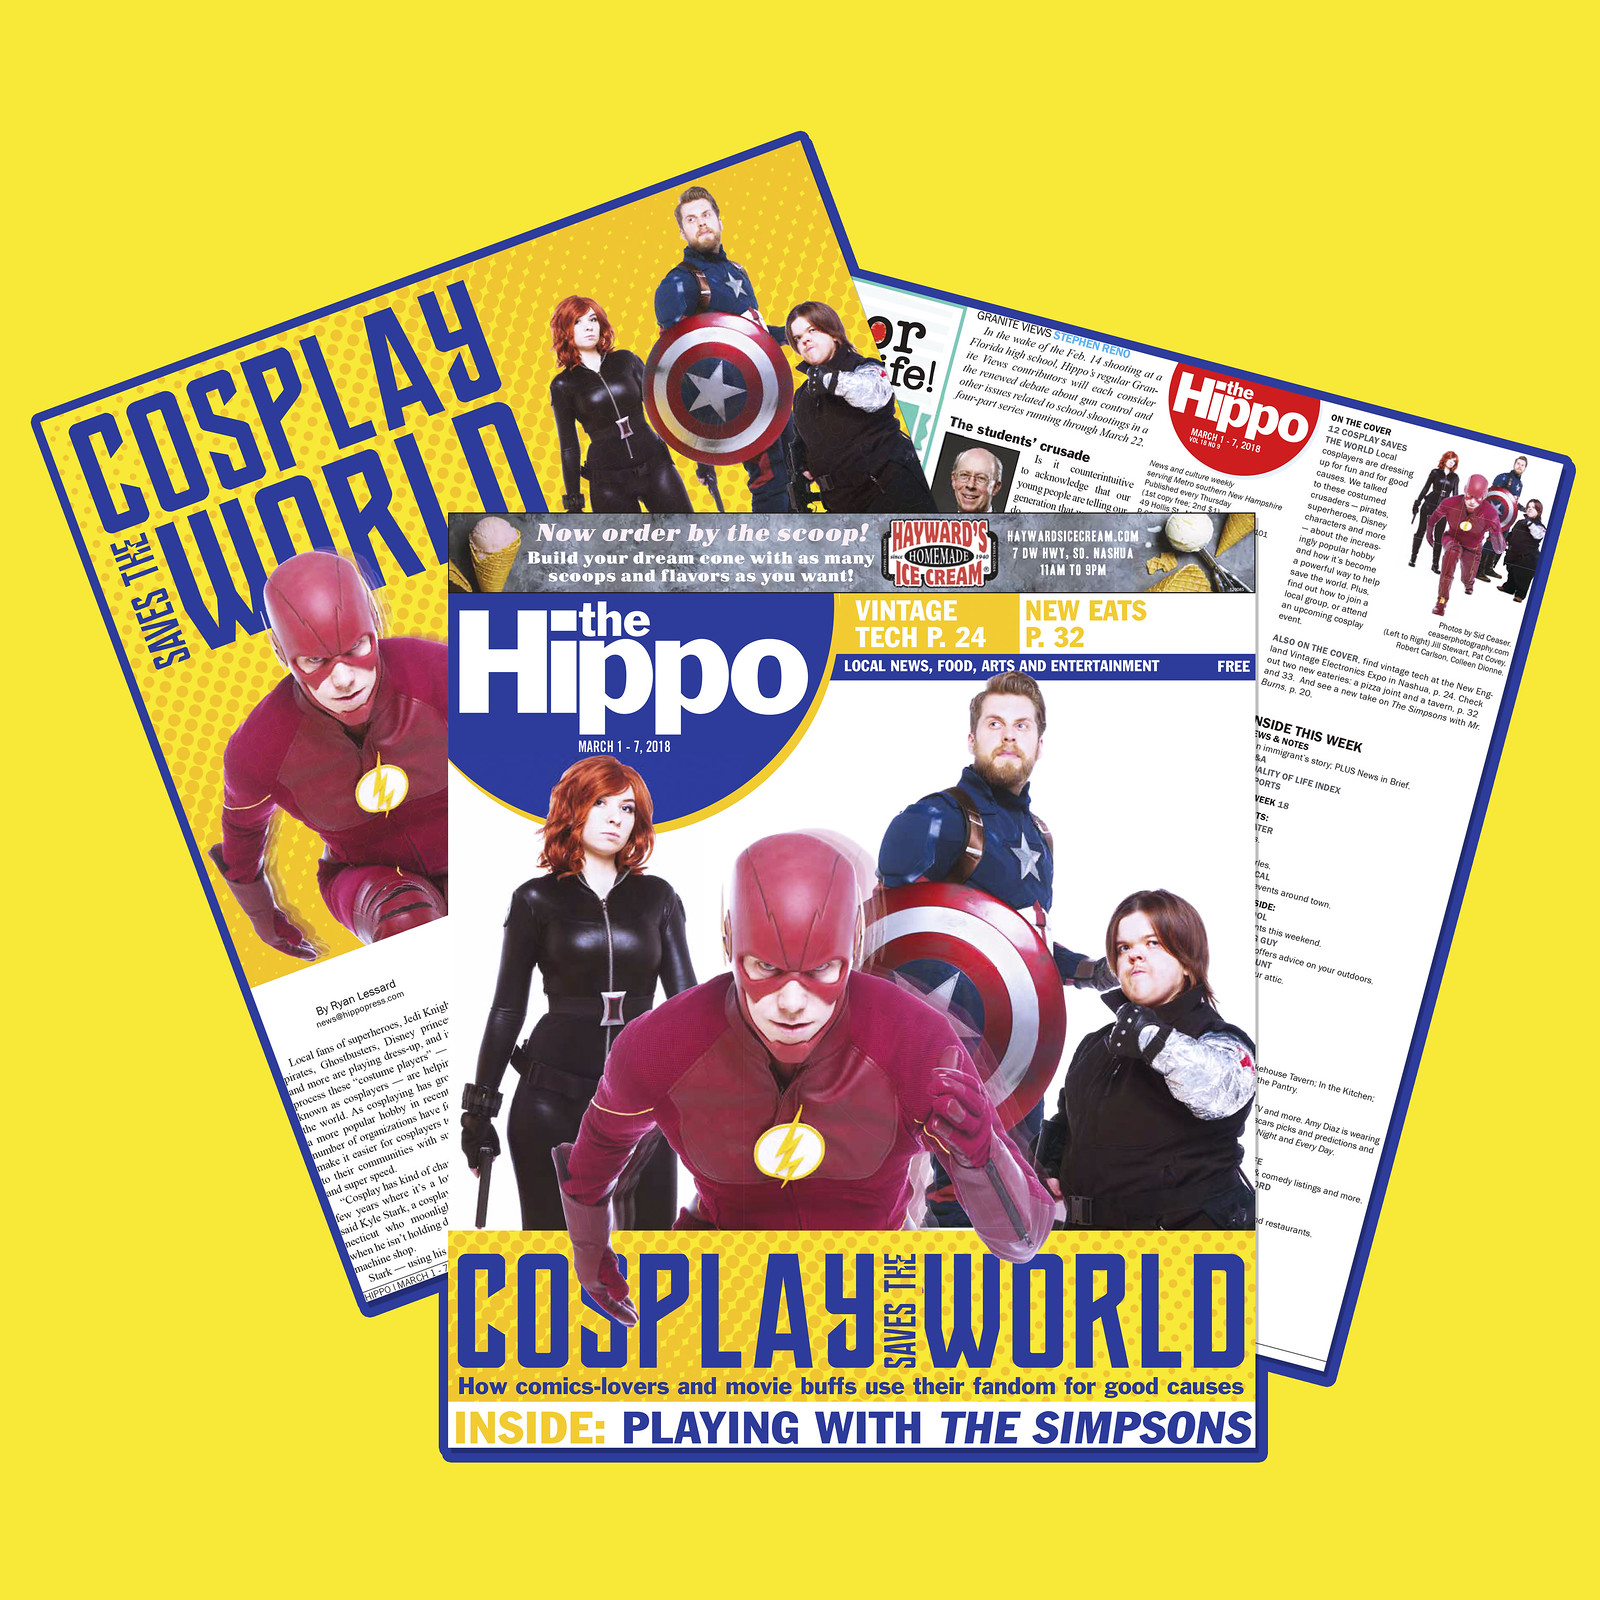 Cosplay Saves The World • Hippo March 1 2018